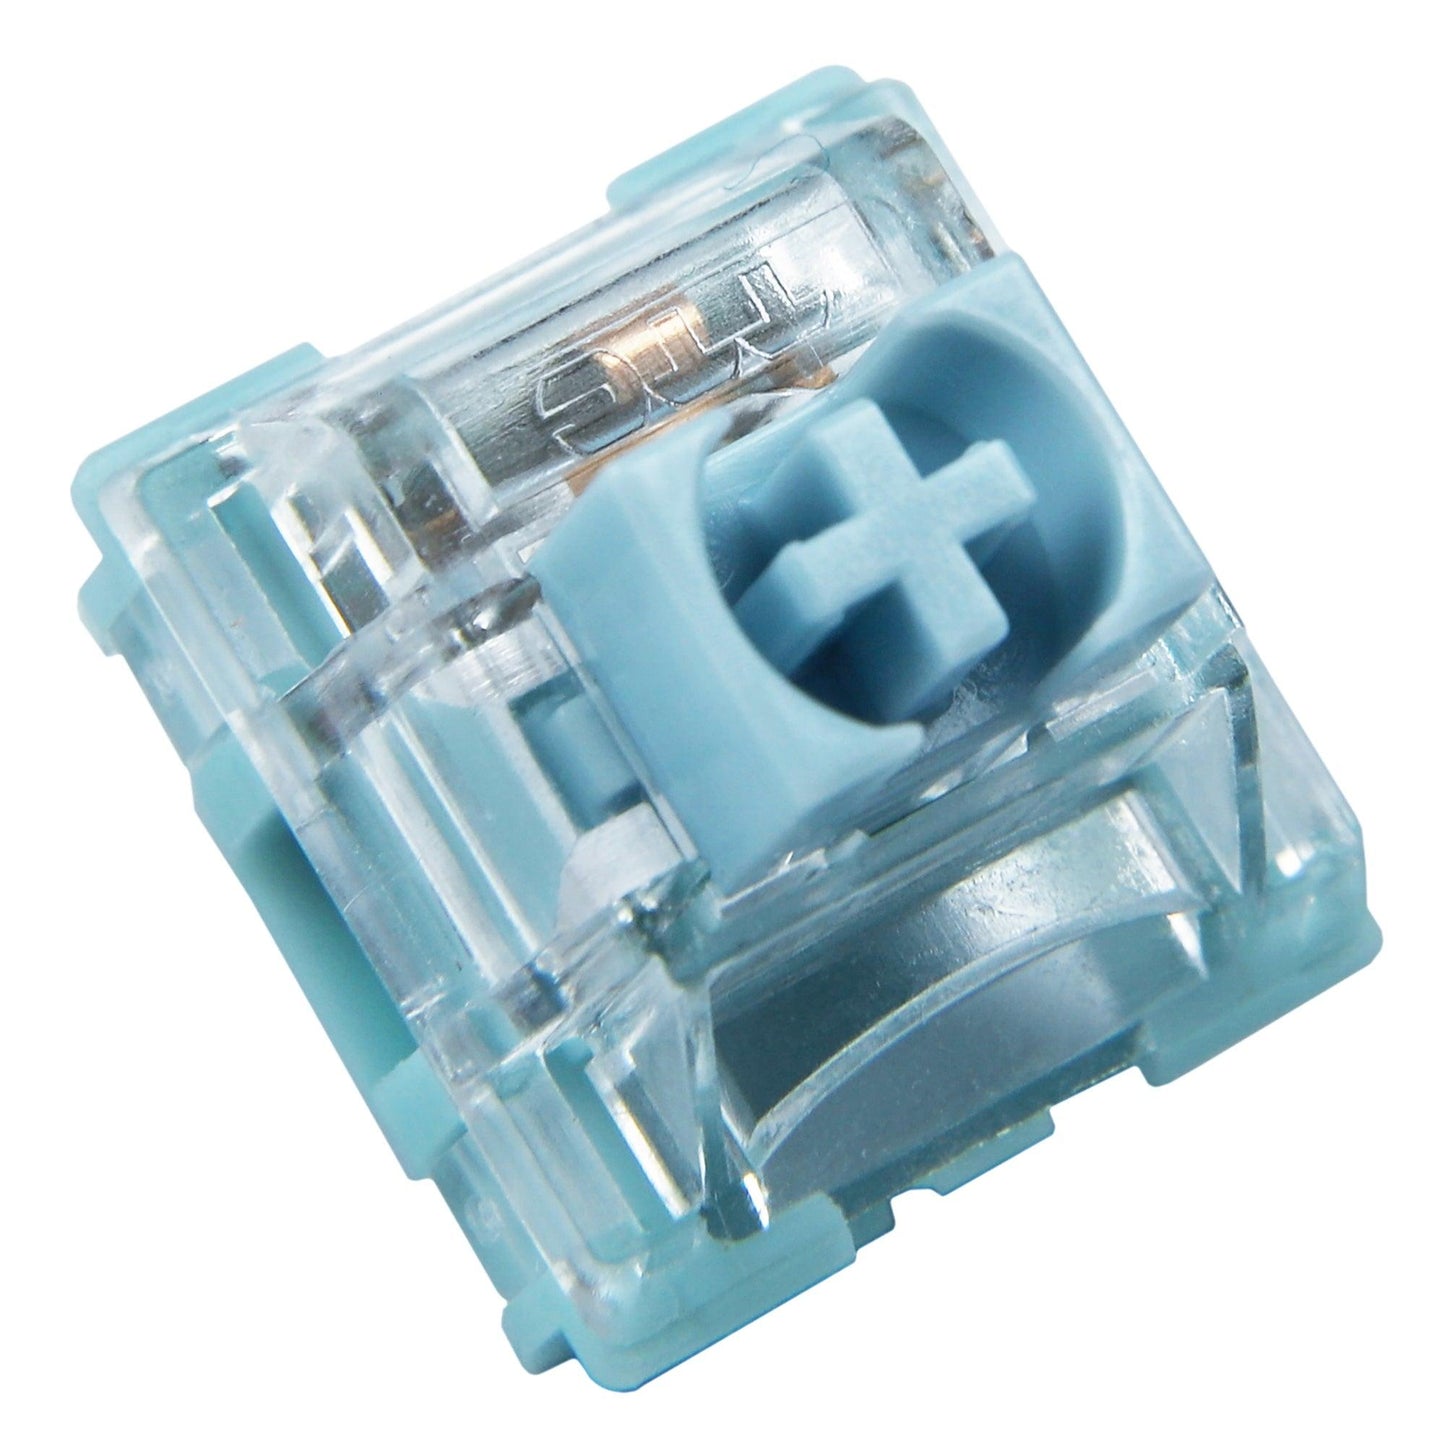 TTC 3 Pin 42g Tactile BLUISH WHITE (Factory Pre-lubed) SMD Switches For MX Mechanical Keyboard - IPOPULARSHOP